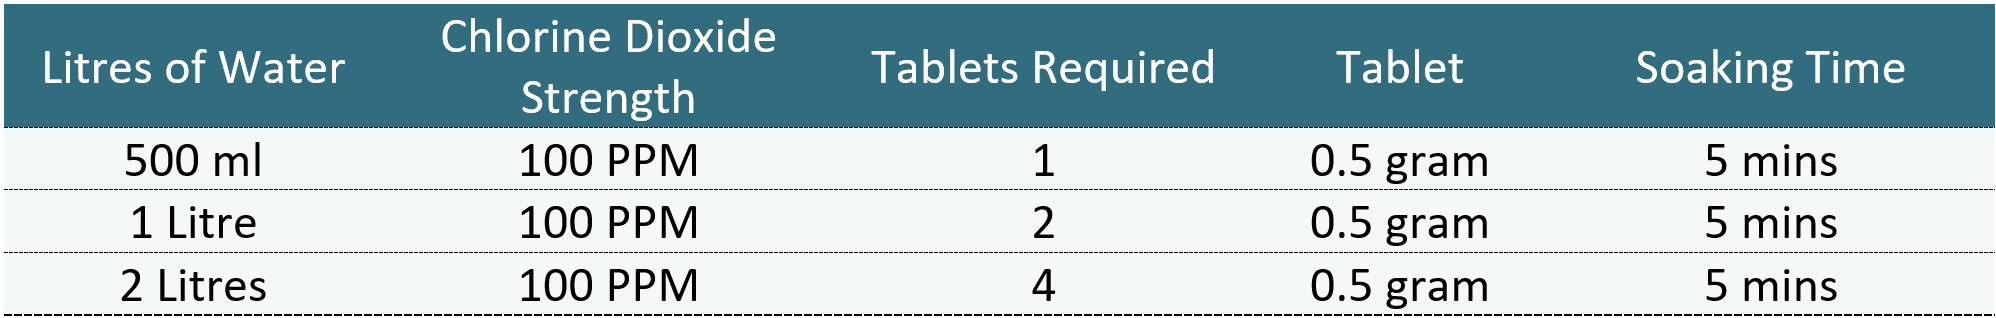 Disinfectant tablets dosing table